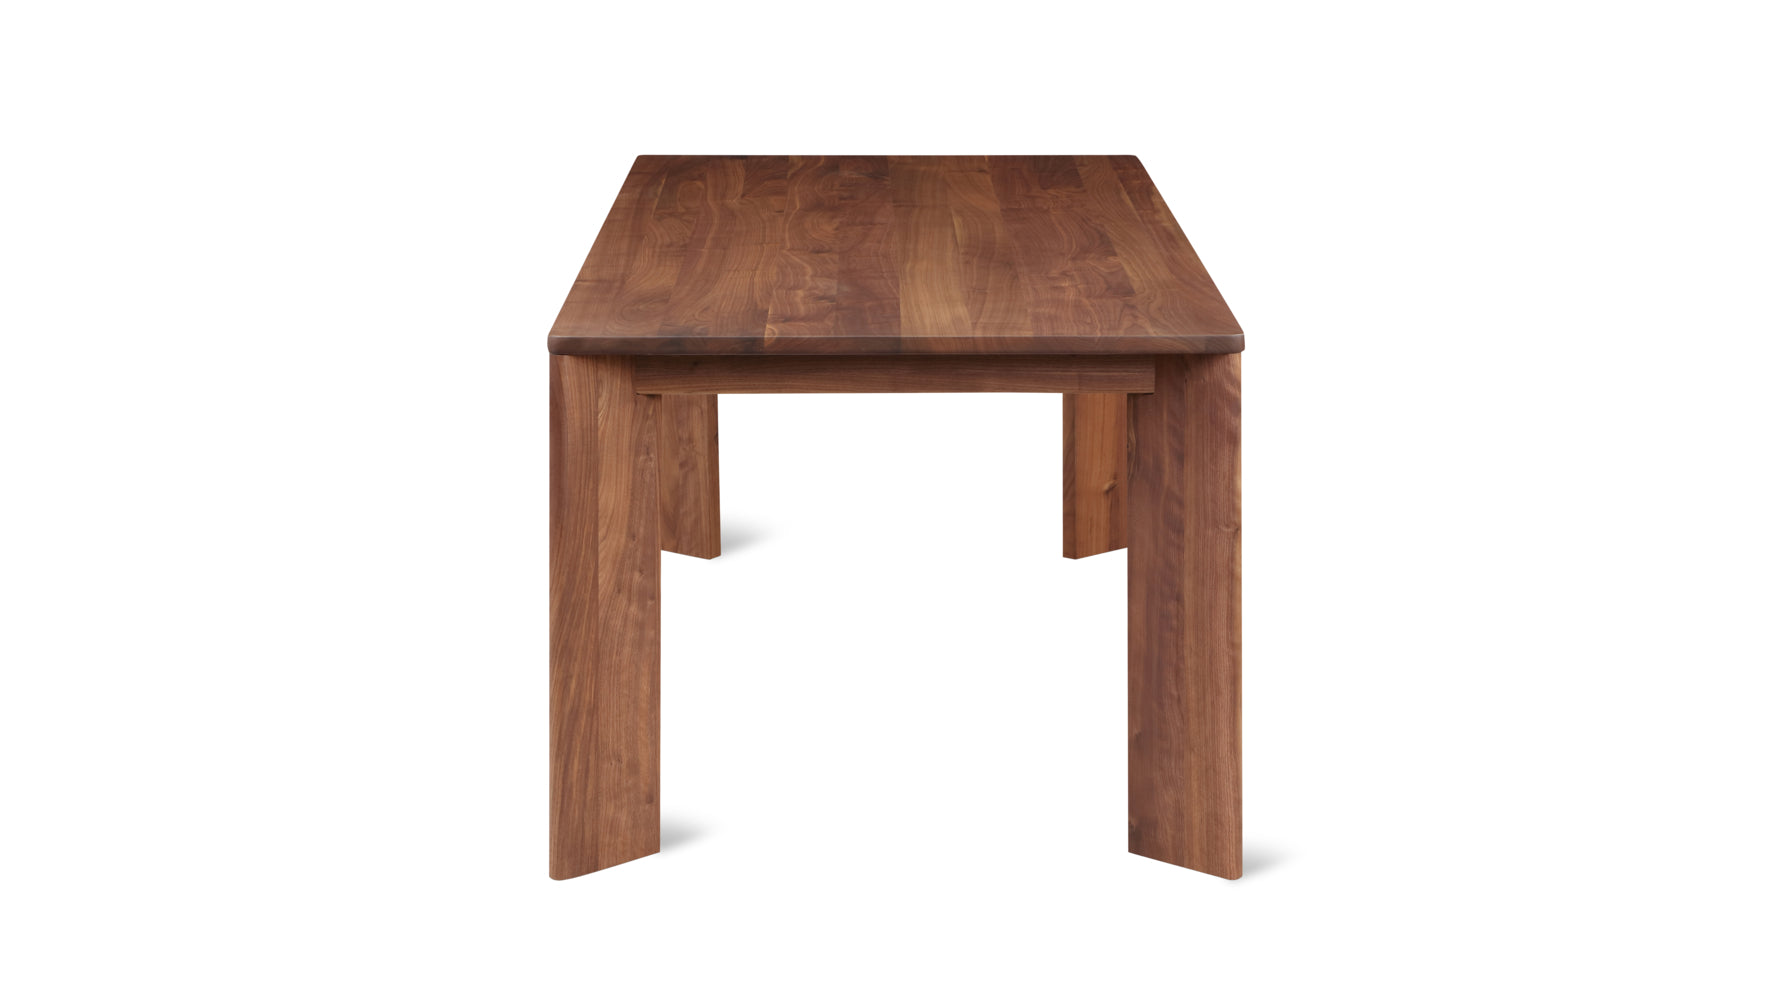 Frame Dining Table, Seats 6-8 People, Walnut - Image 3